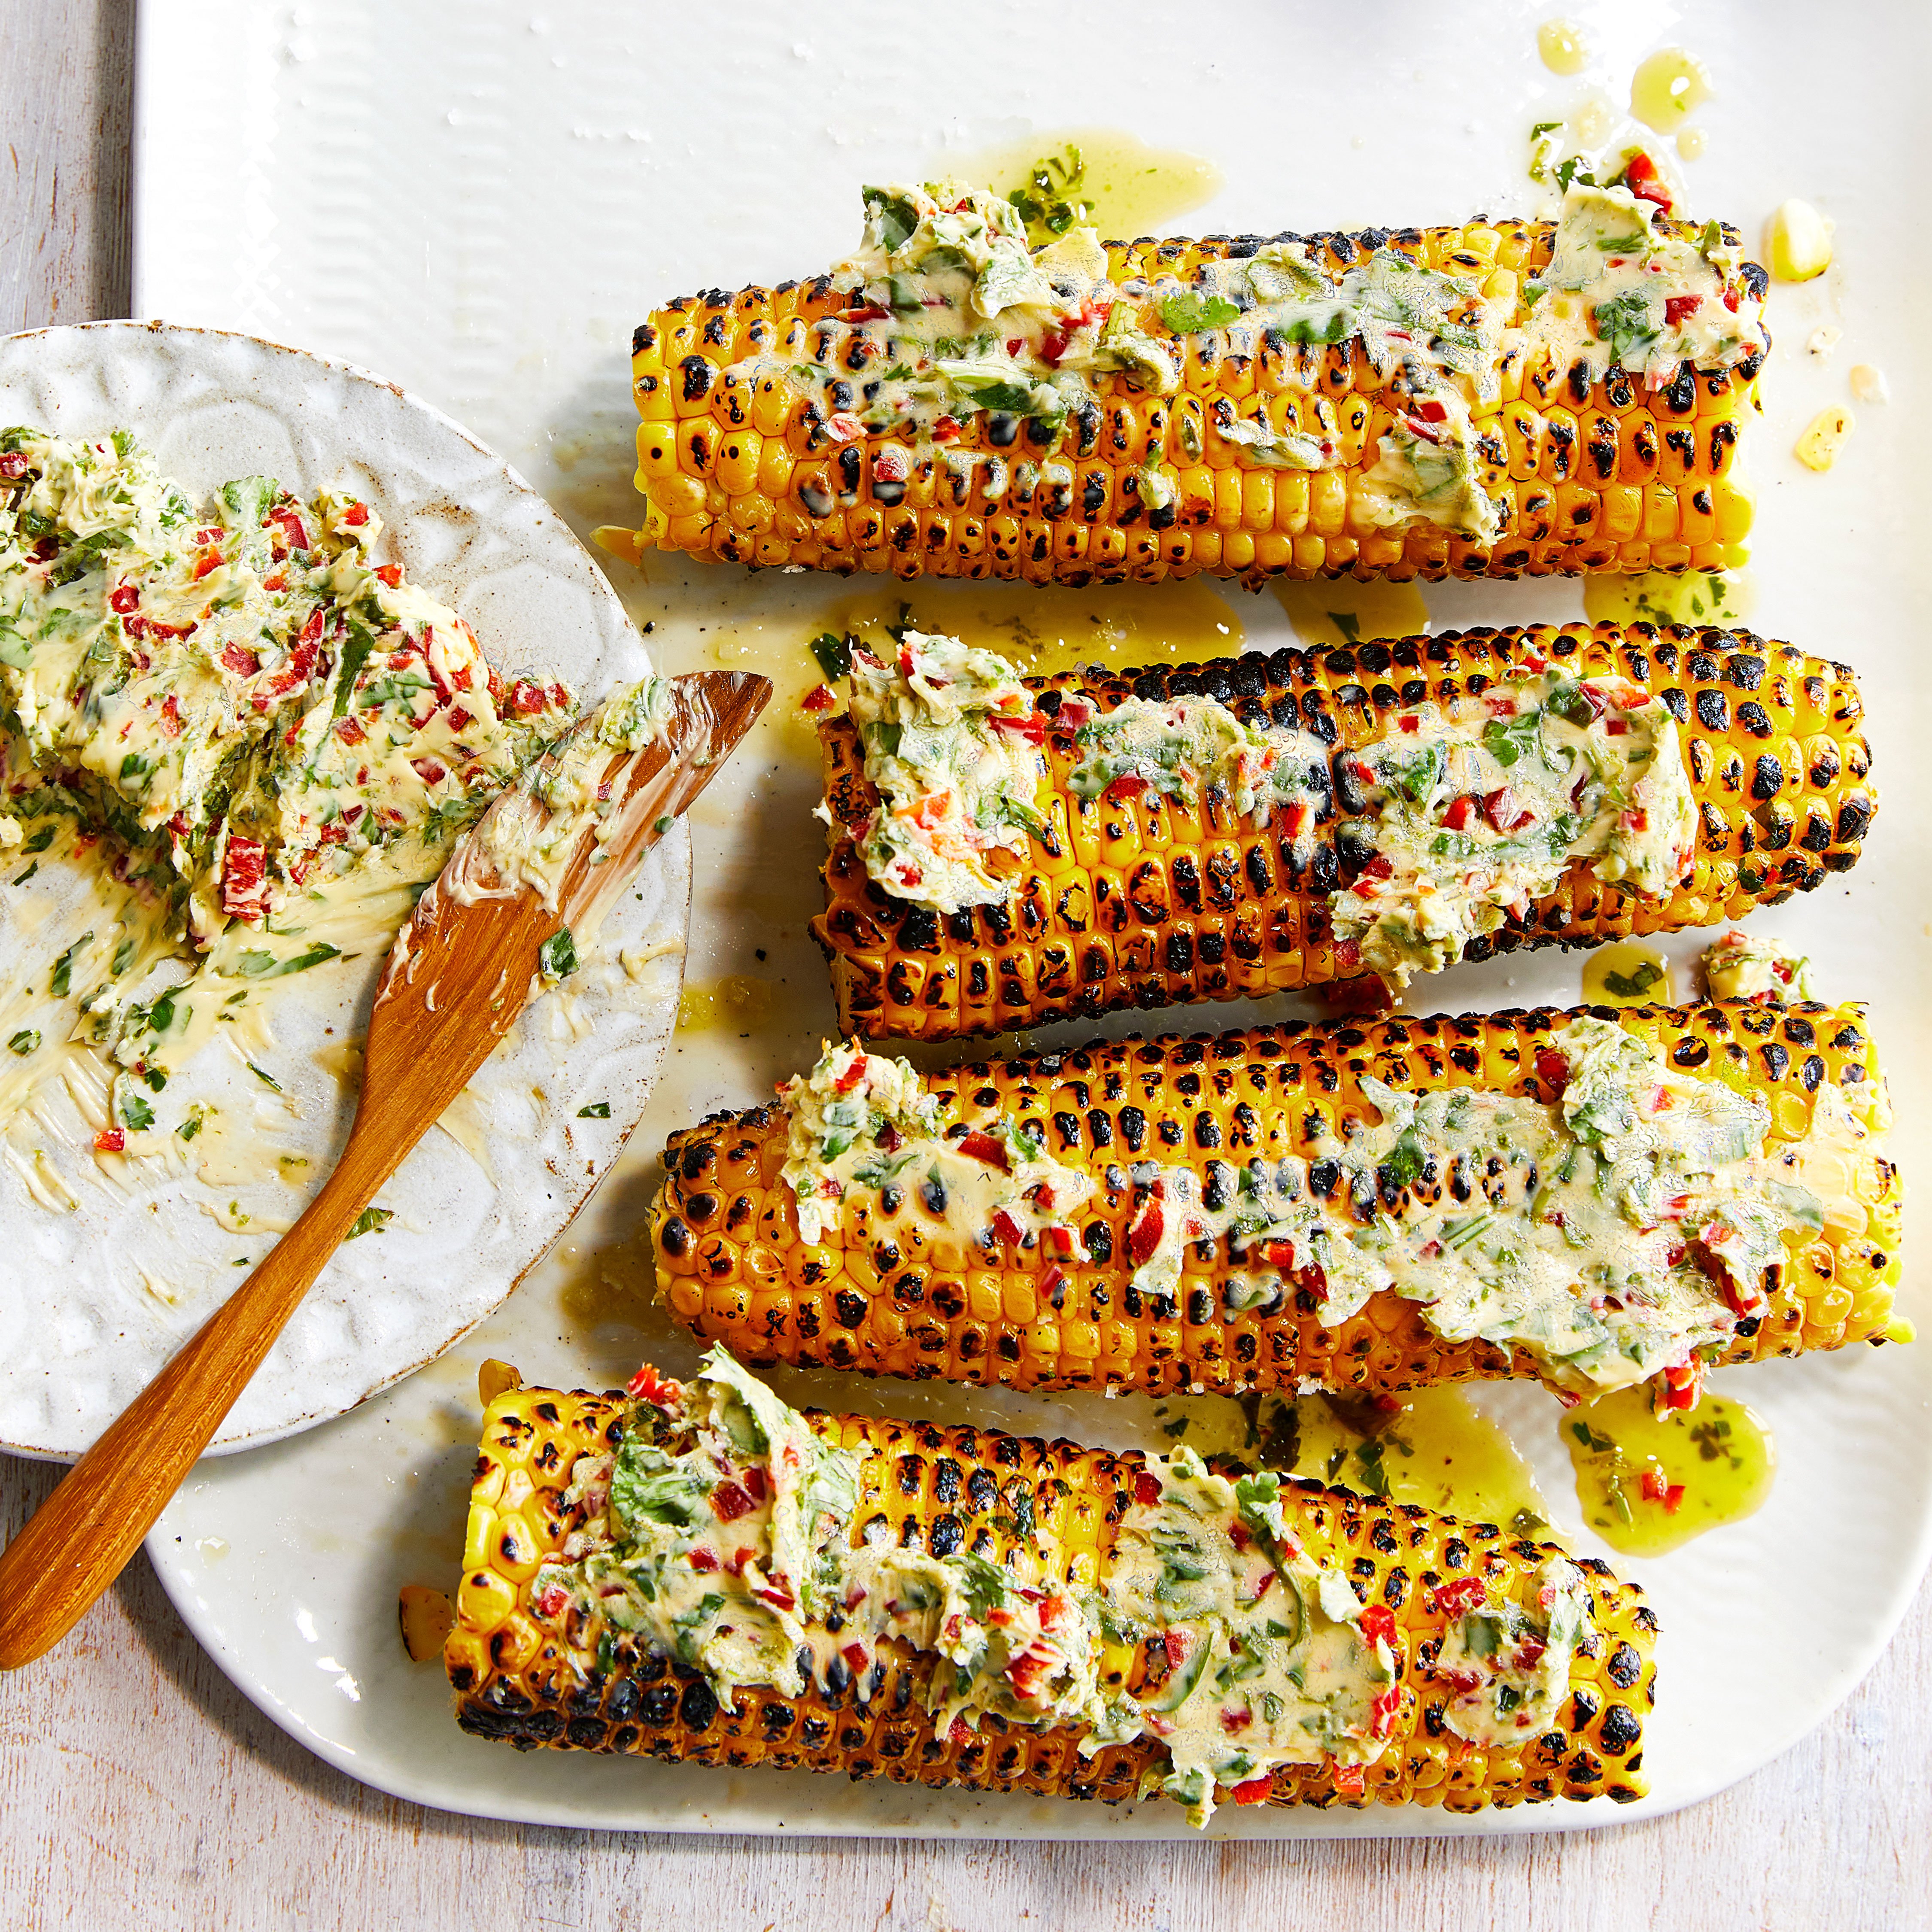 Grilled sweetcorn with chilli butter